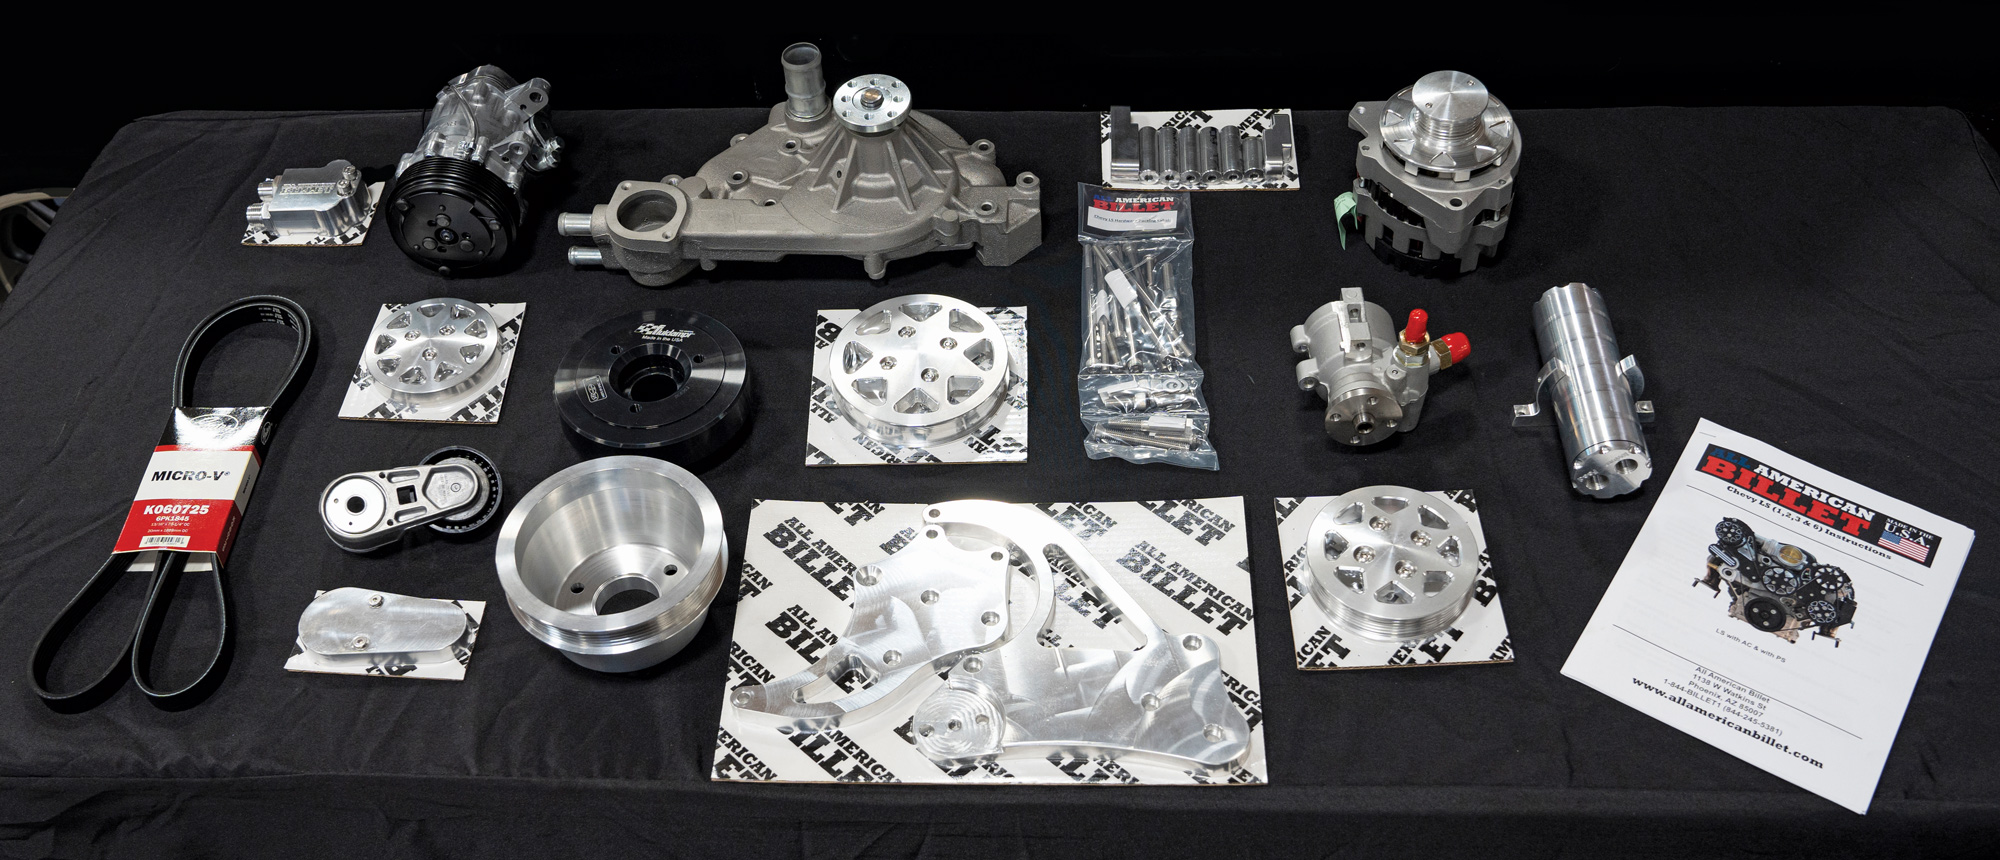 The All<br />
American Billet Chevy LS Serpentine kit includes everything necessary for an easy, drama-free installation, including all the hardware and easy-to-follow, detailed, step-by-step instructions.